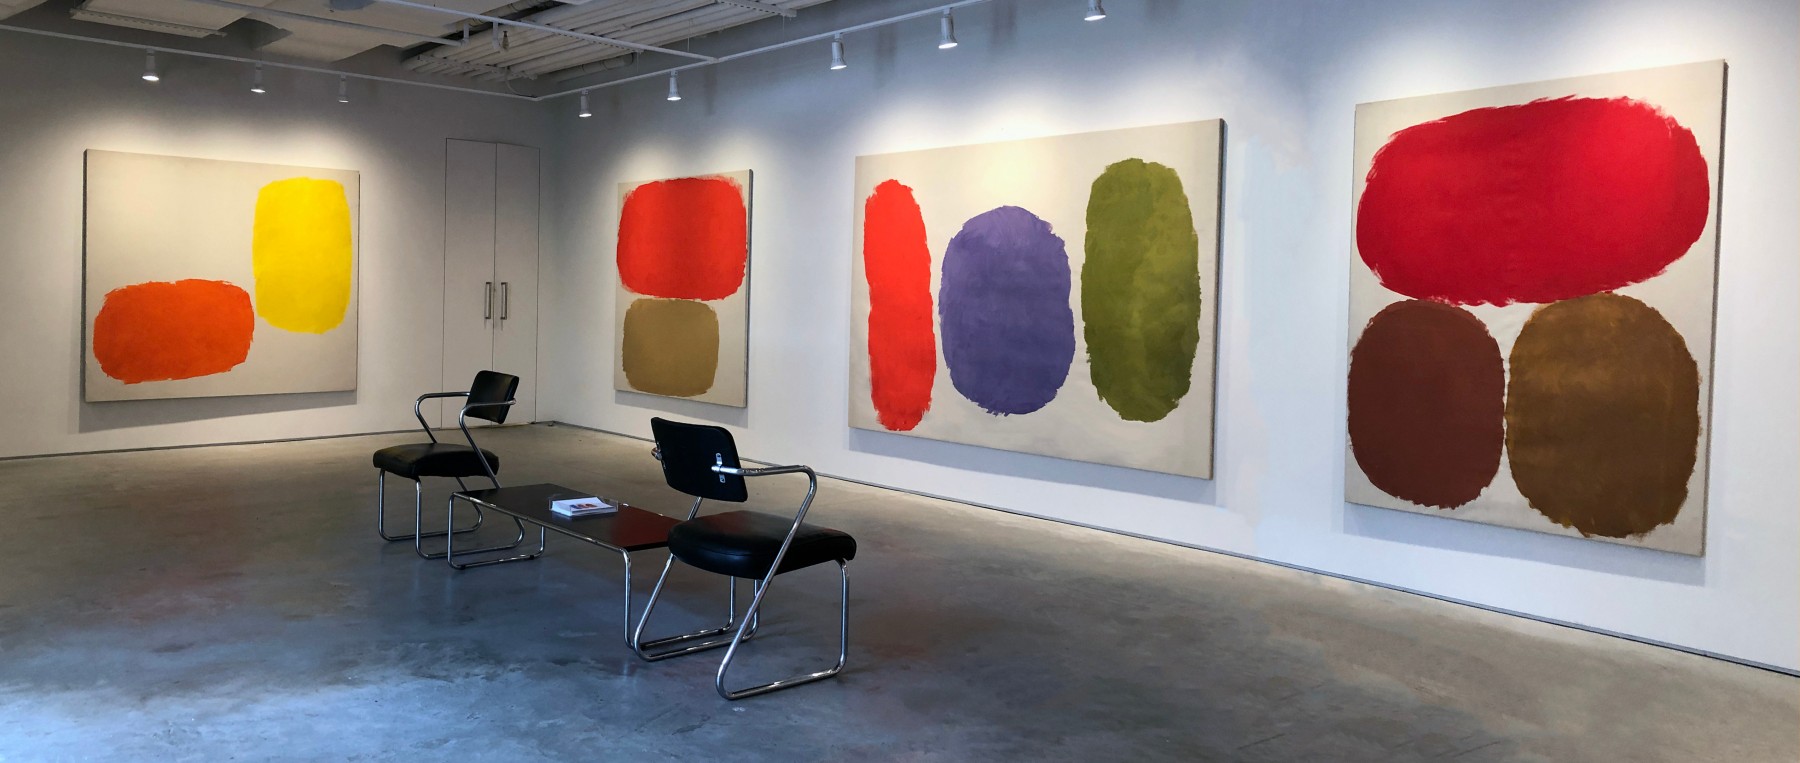 Four paintings by Ray Parker with colors of yellow, orange, umber, yellow ochre, violet, and red installed on a white wall.  Black table and two chairs are positioned in the middle of the room.